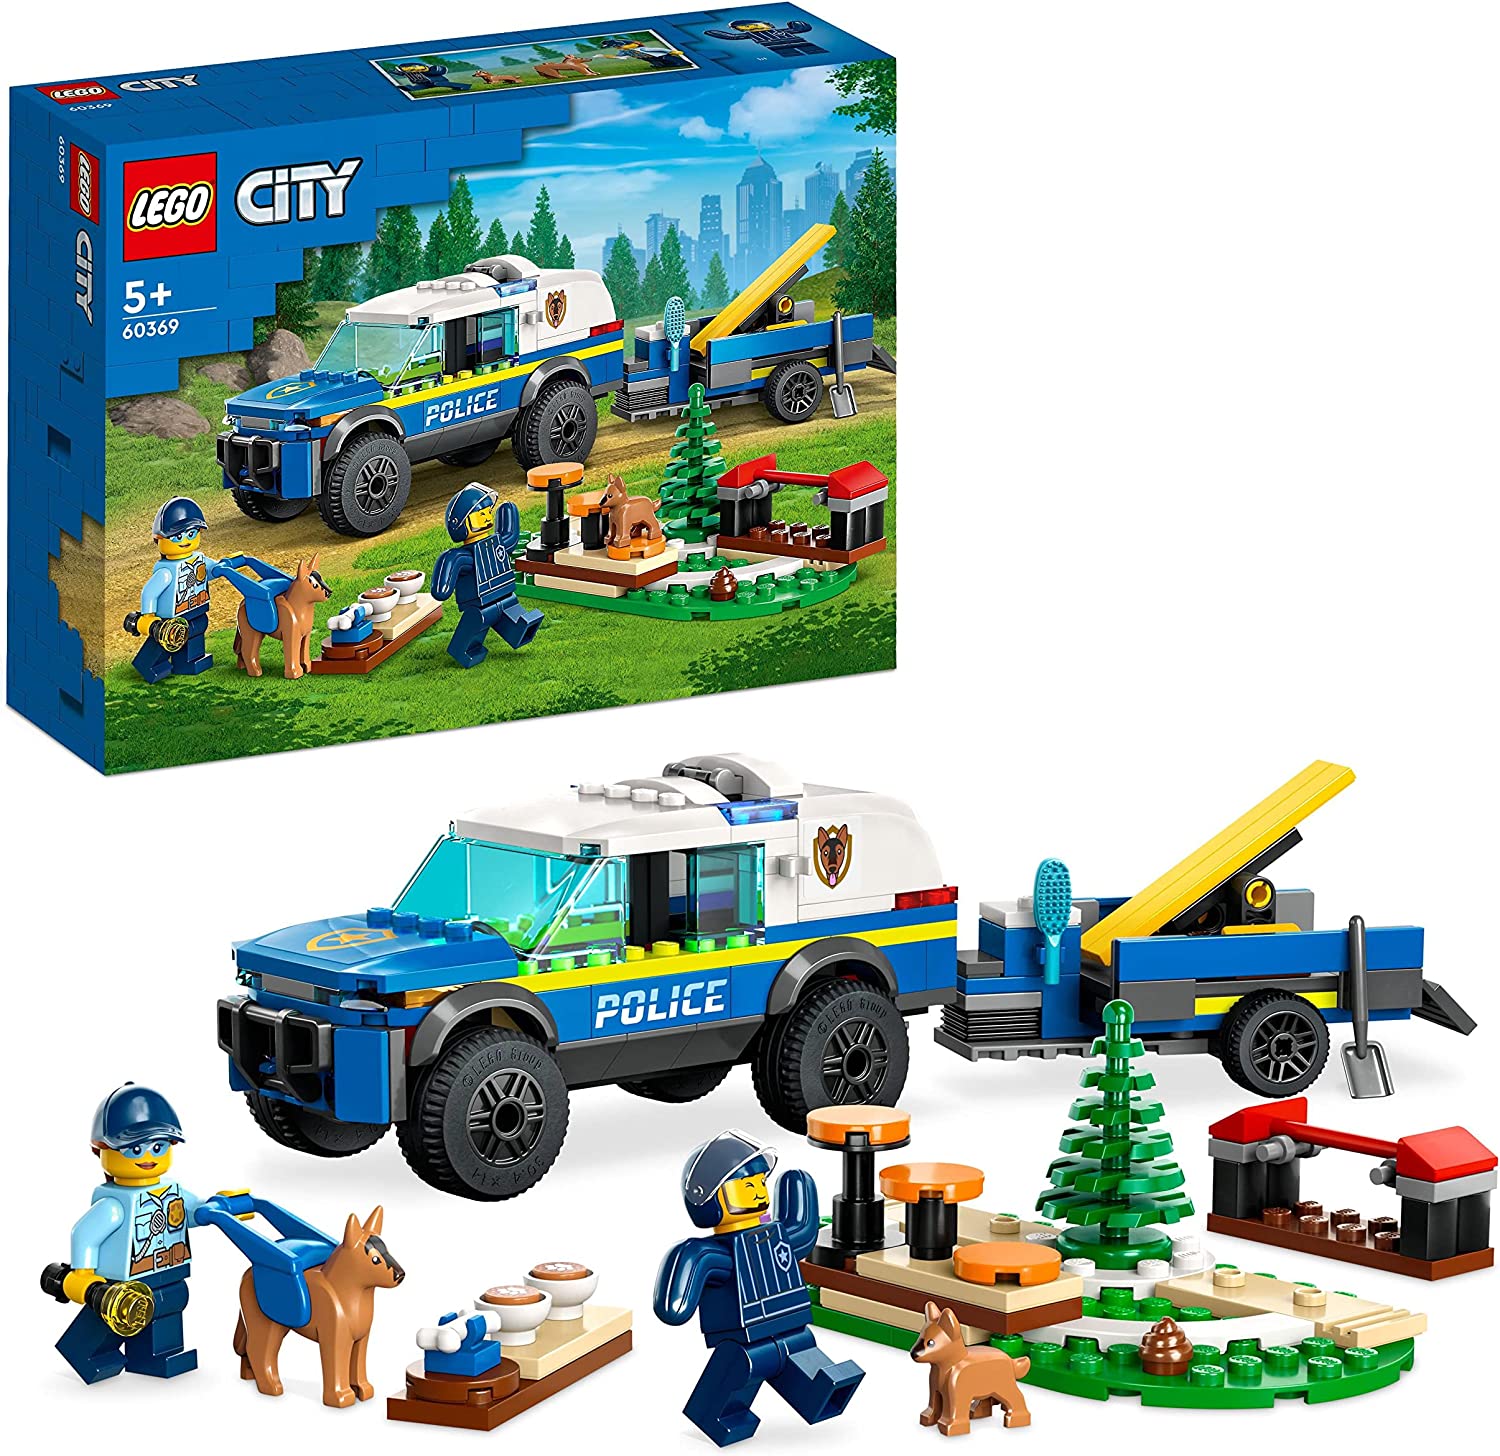 LEGO 60369 City Mobile Police Dog Training Police Car Toy with Trailer Dog and Puppy Figures Animal Set for Children from 5 Years